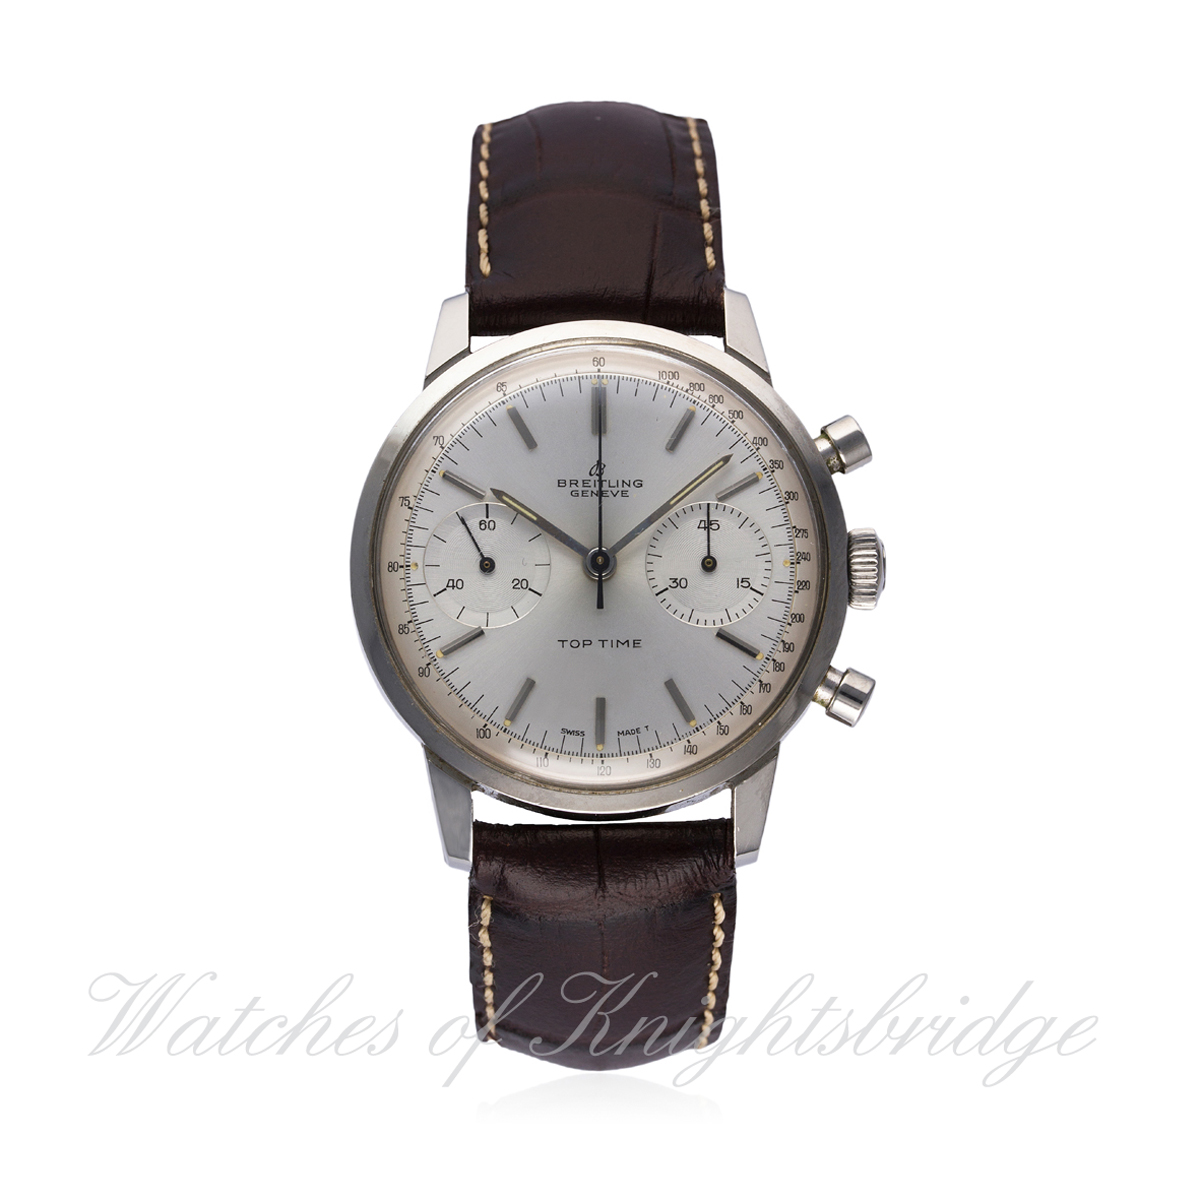 A GENTLEMAN`S STAINLESS STEEL BREITLING TOP TIME CHRONOGRAPH WRIST WATCH CIRCA 1960s, REF. 2002